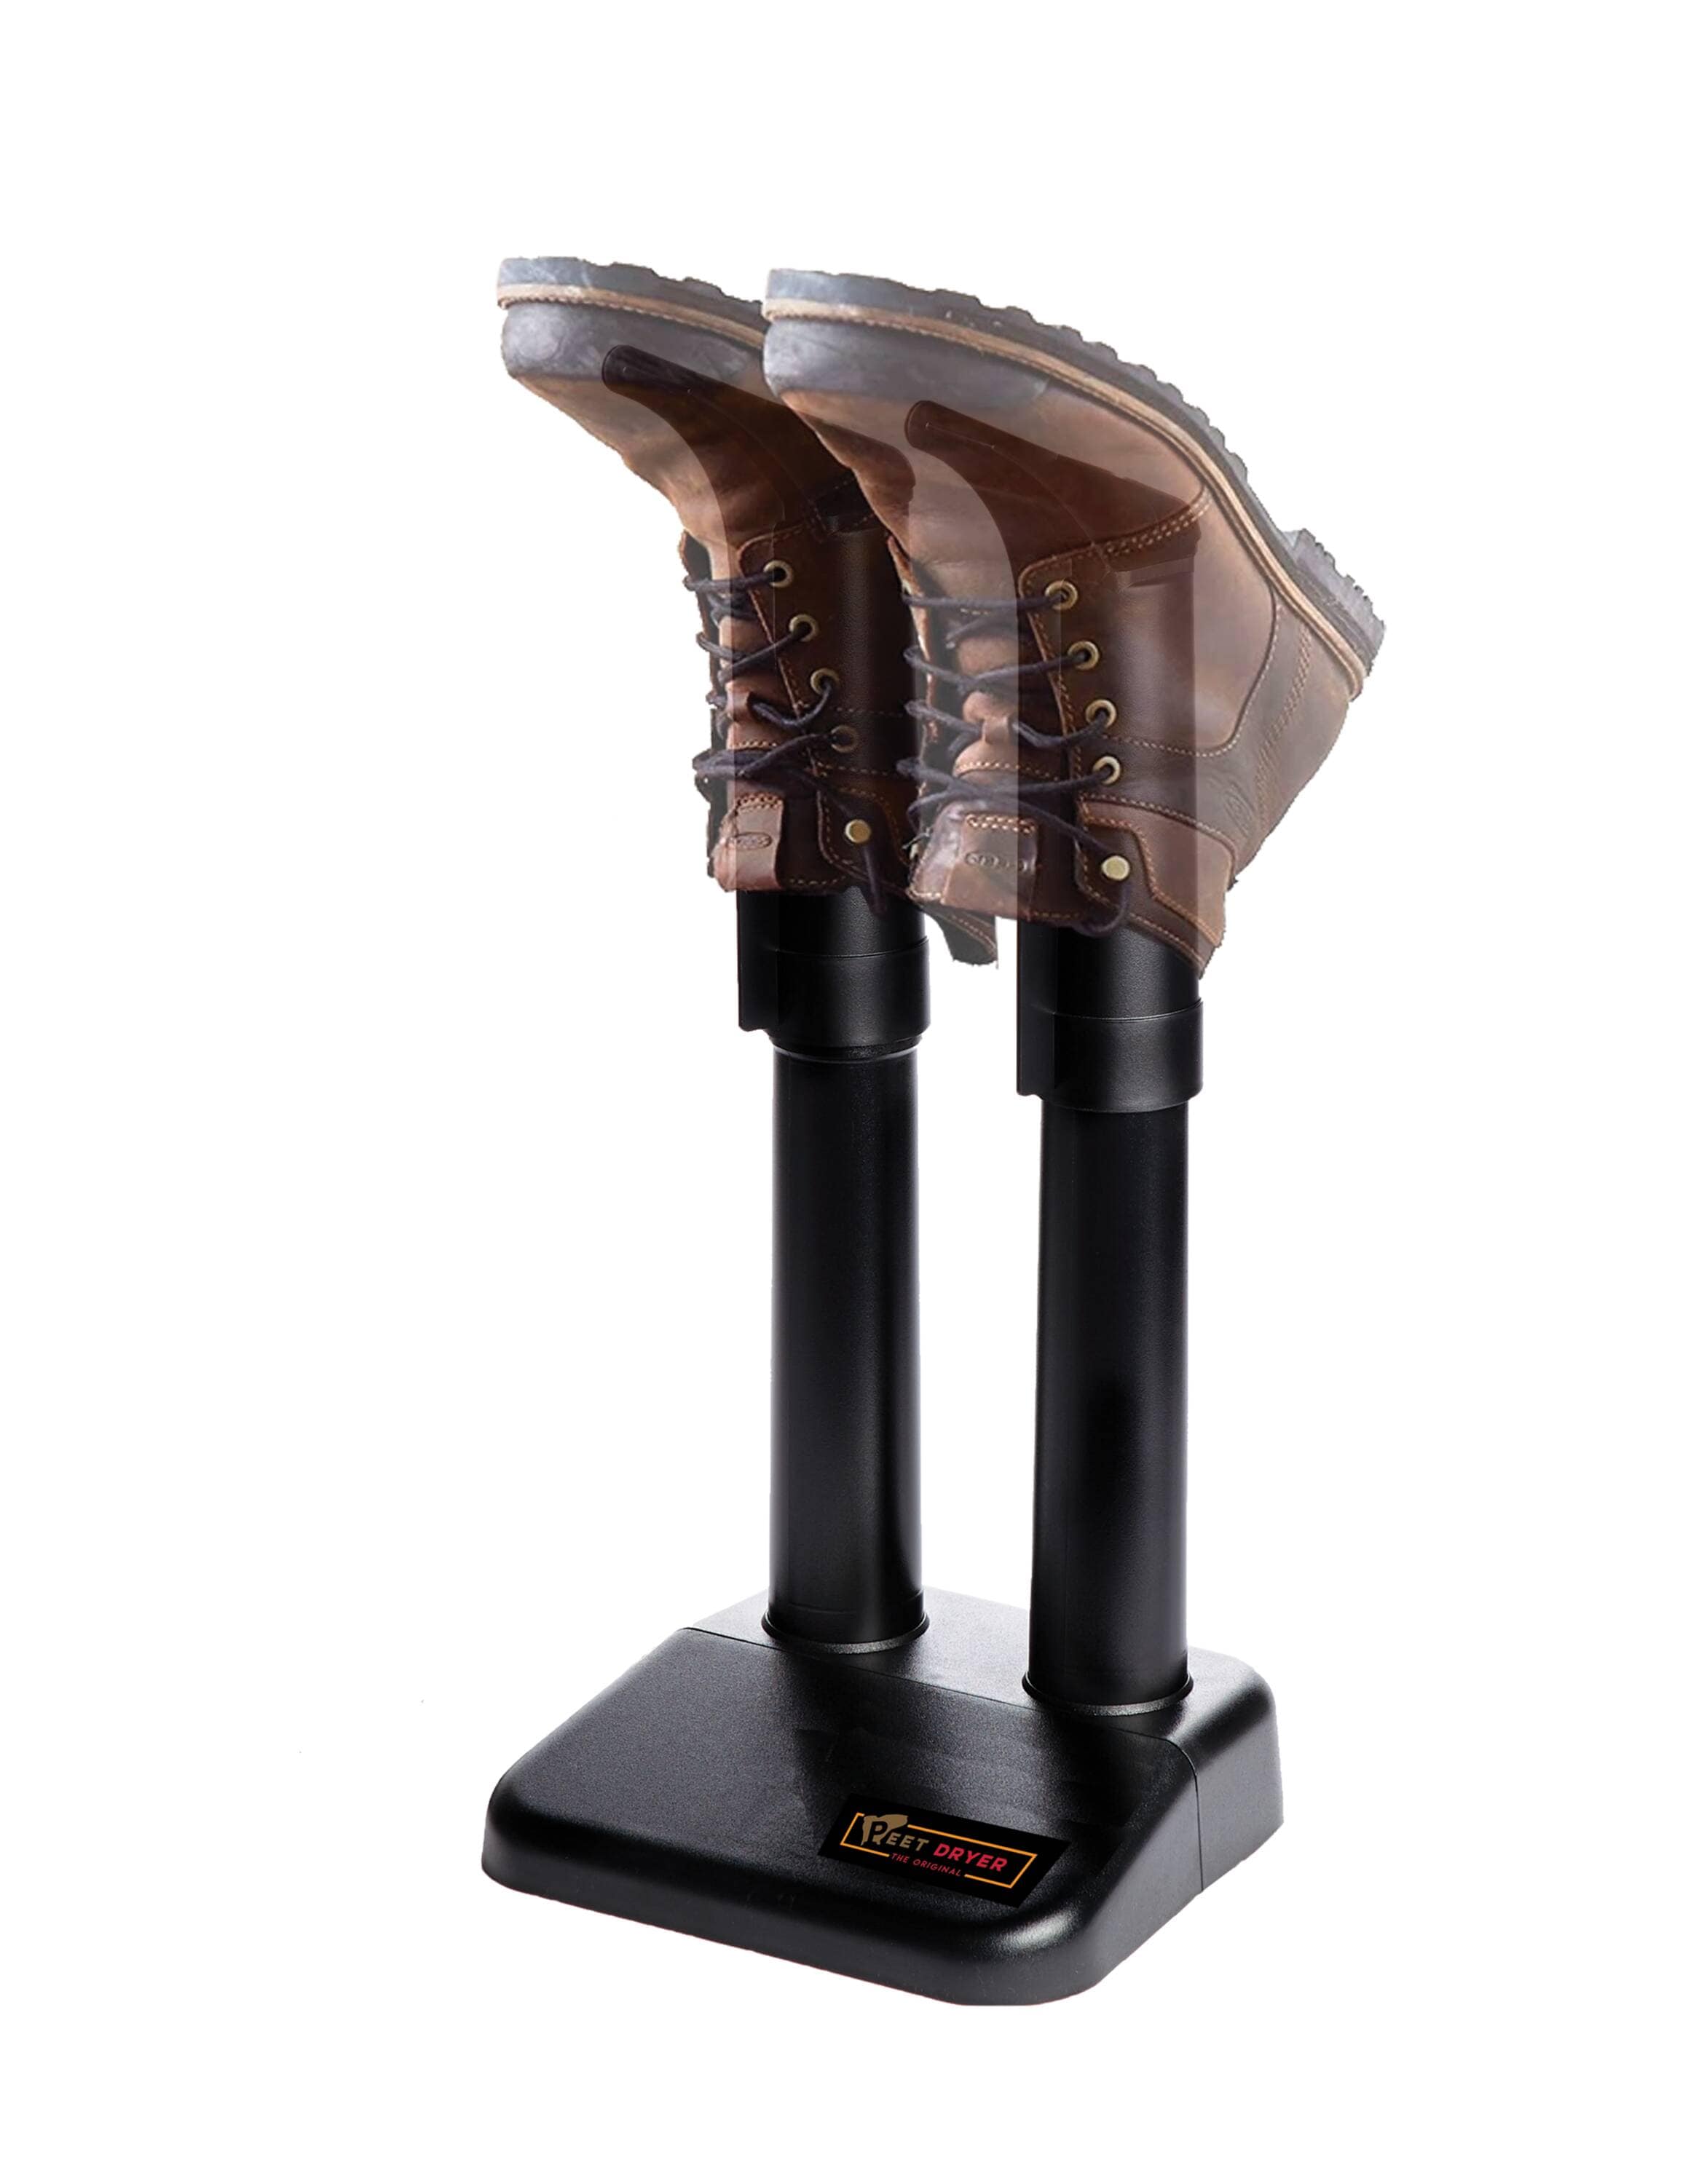 PEET Original 2-Shoe Dryer for Hunting Boots - Silent, Gentle Air ...